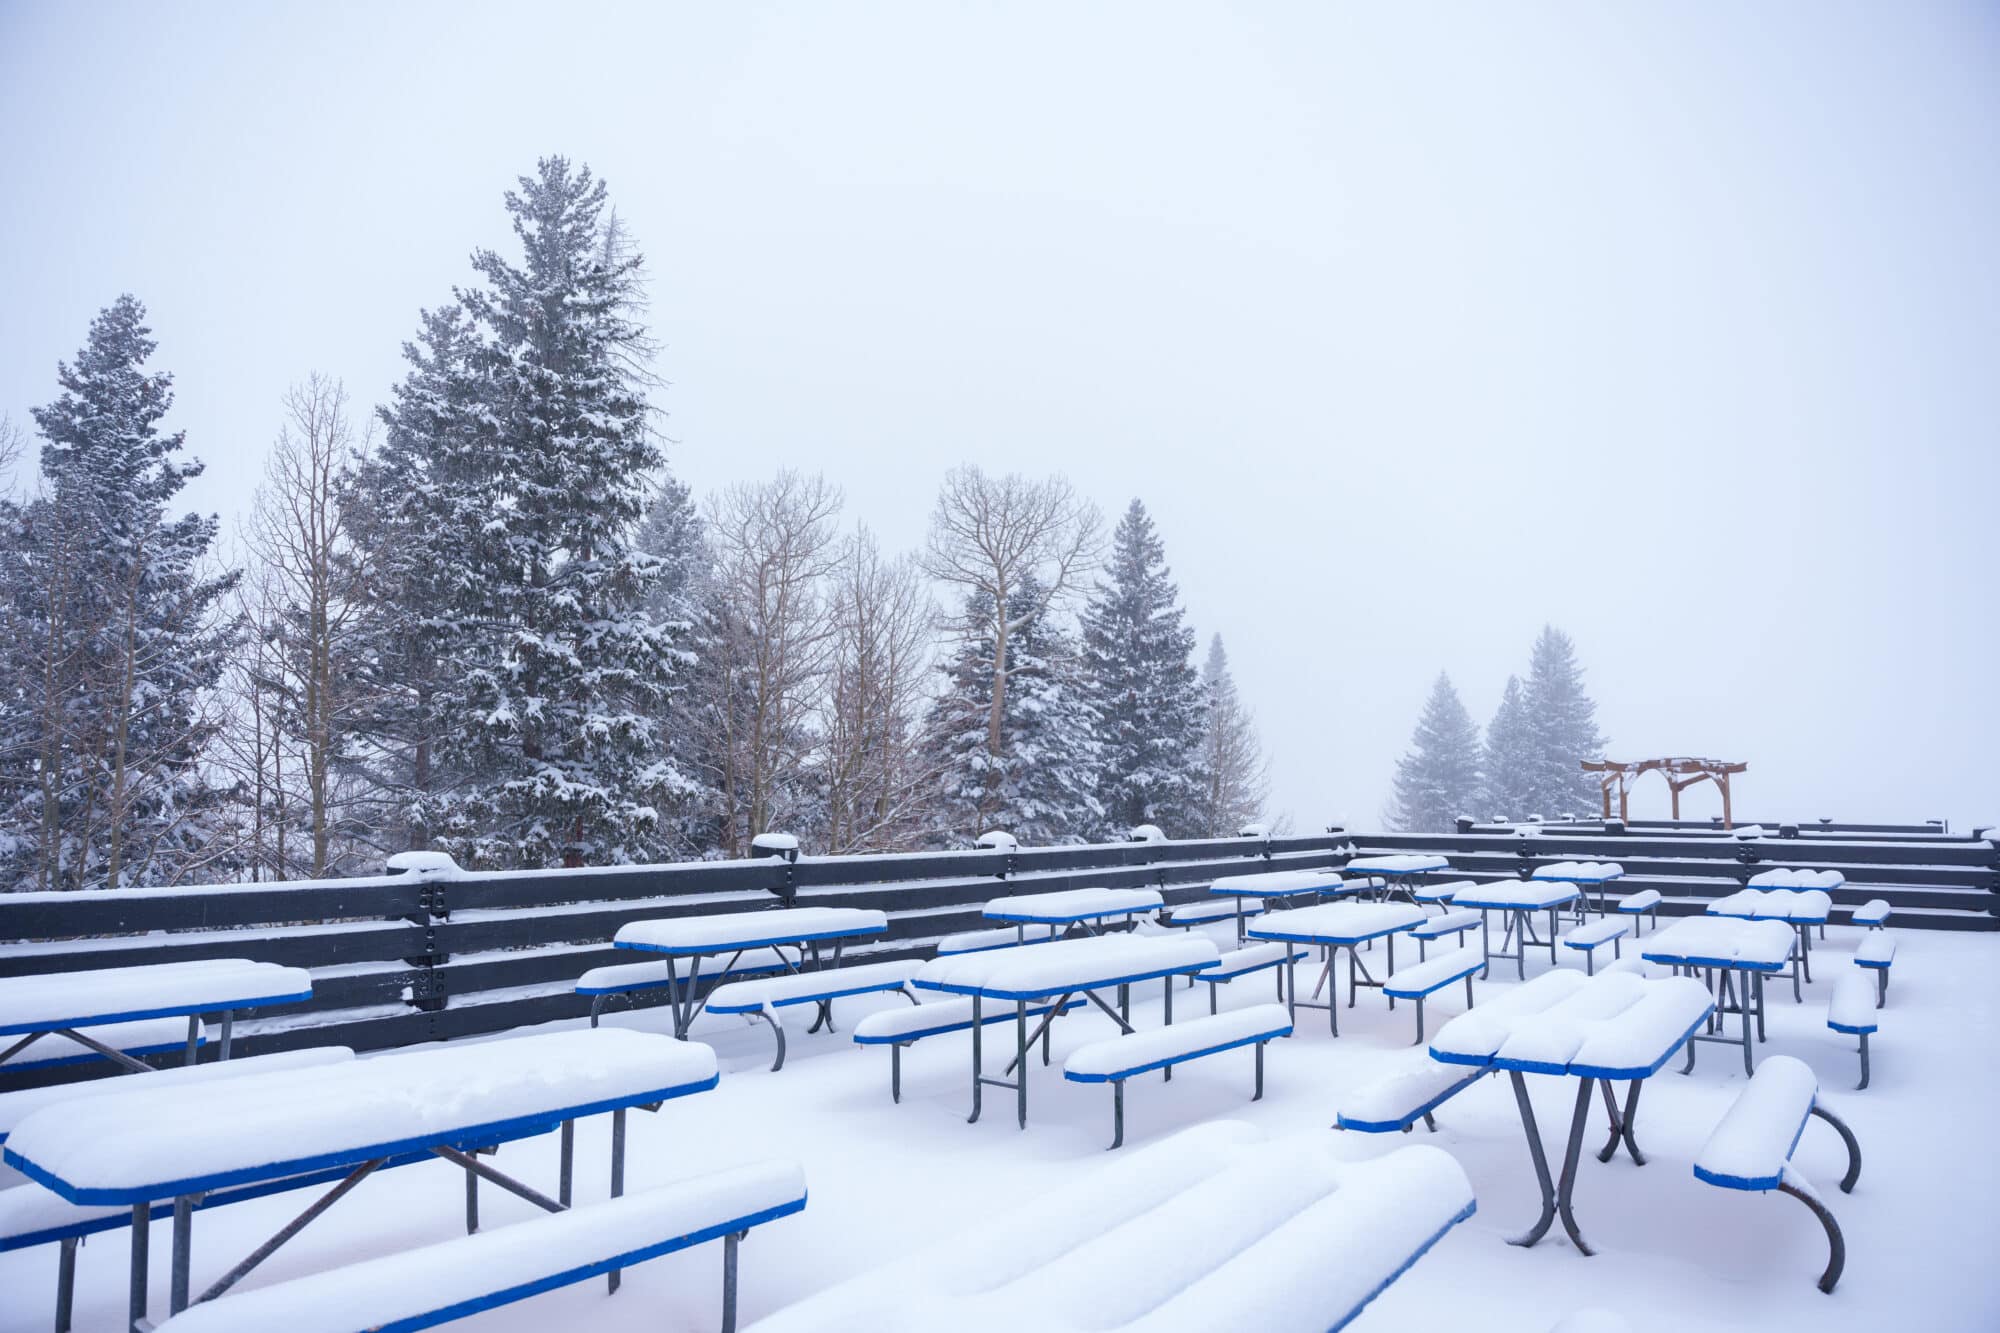 Picnic tables covered in snow